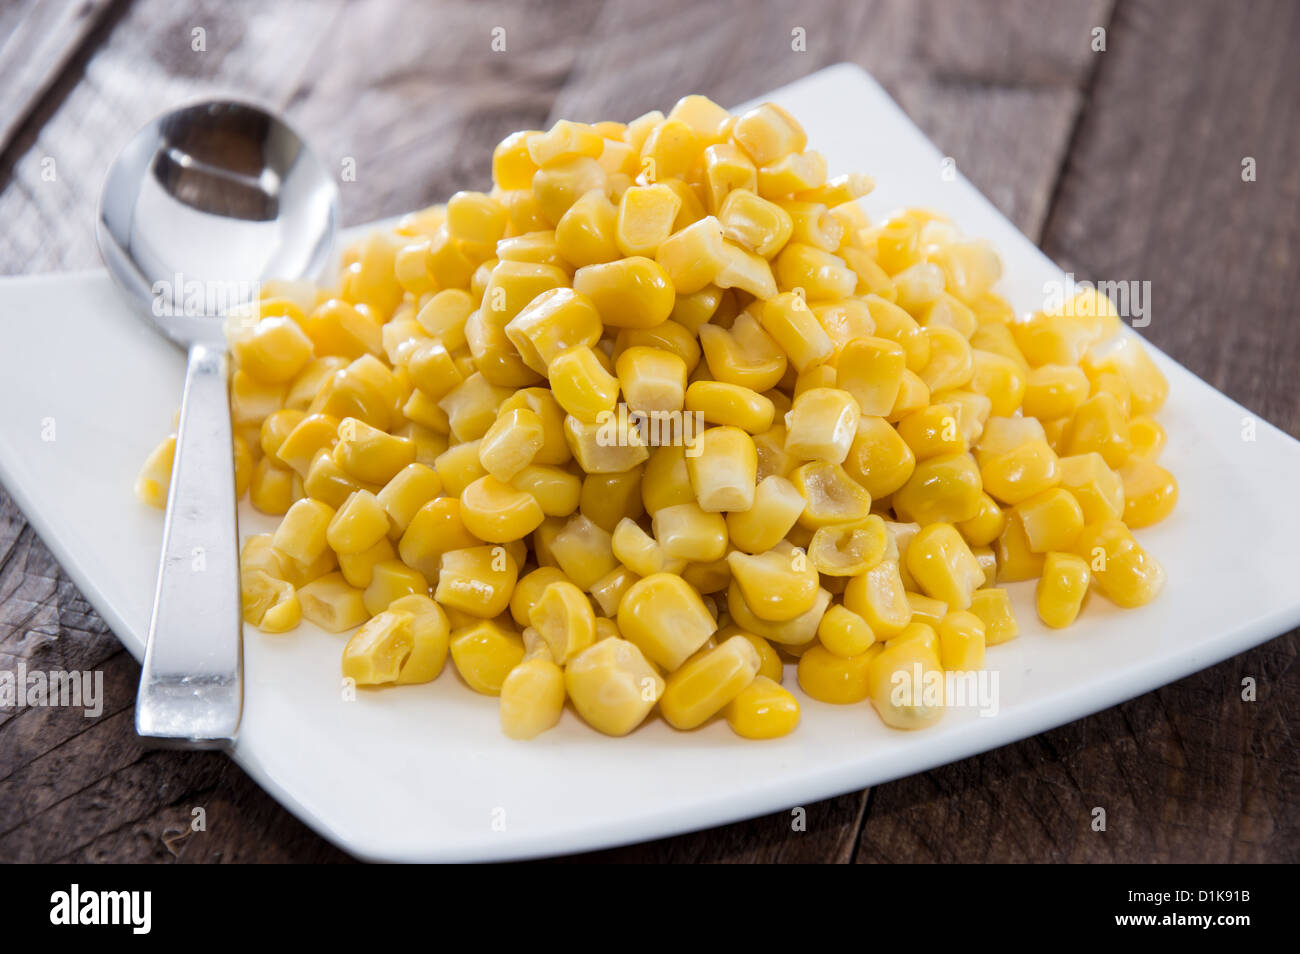 Plate with Corn on wooden background Stock Photo